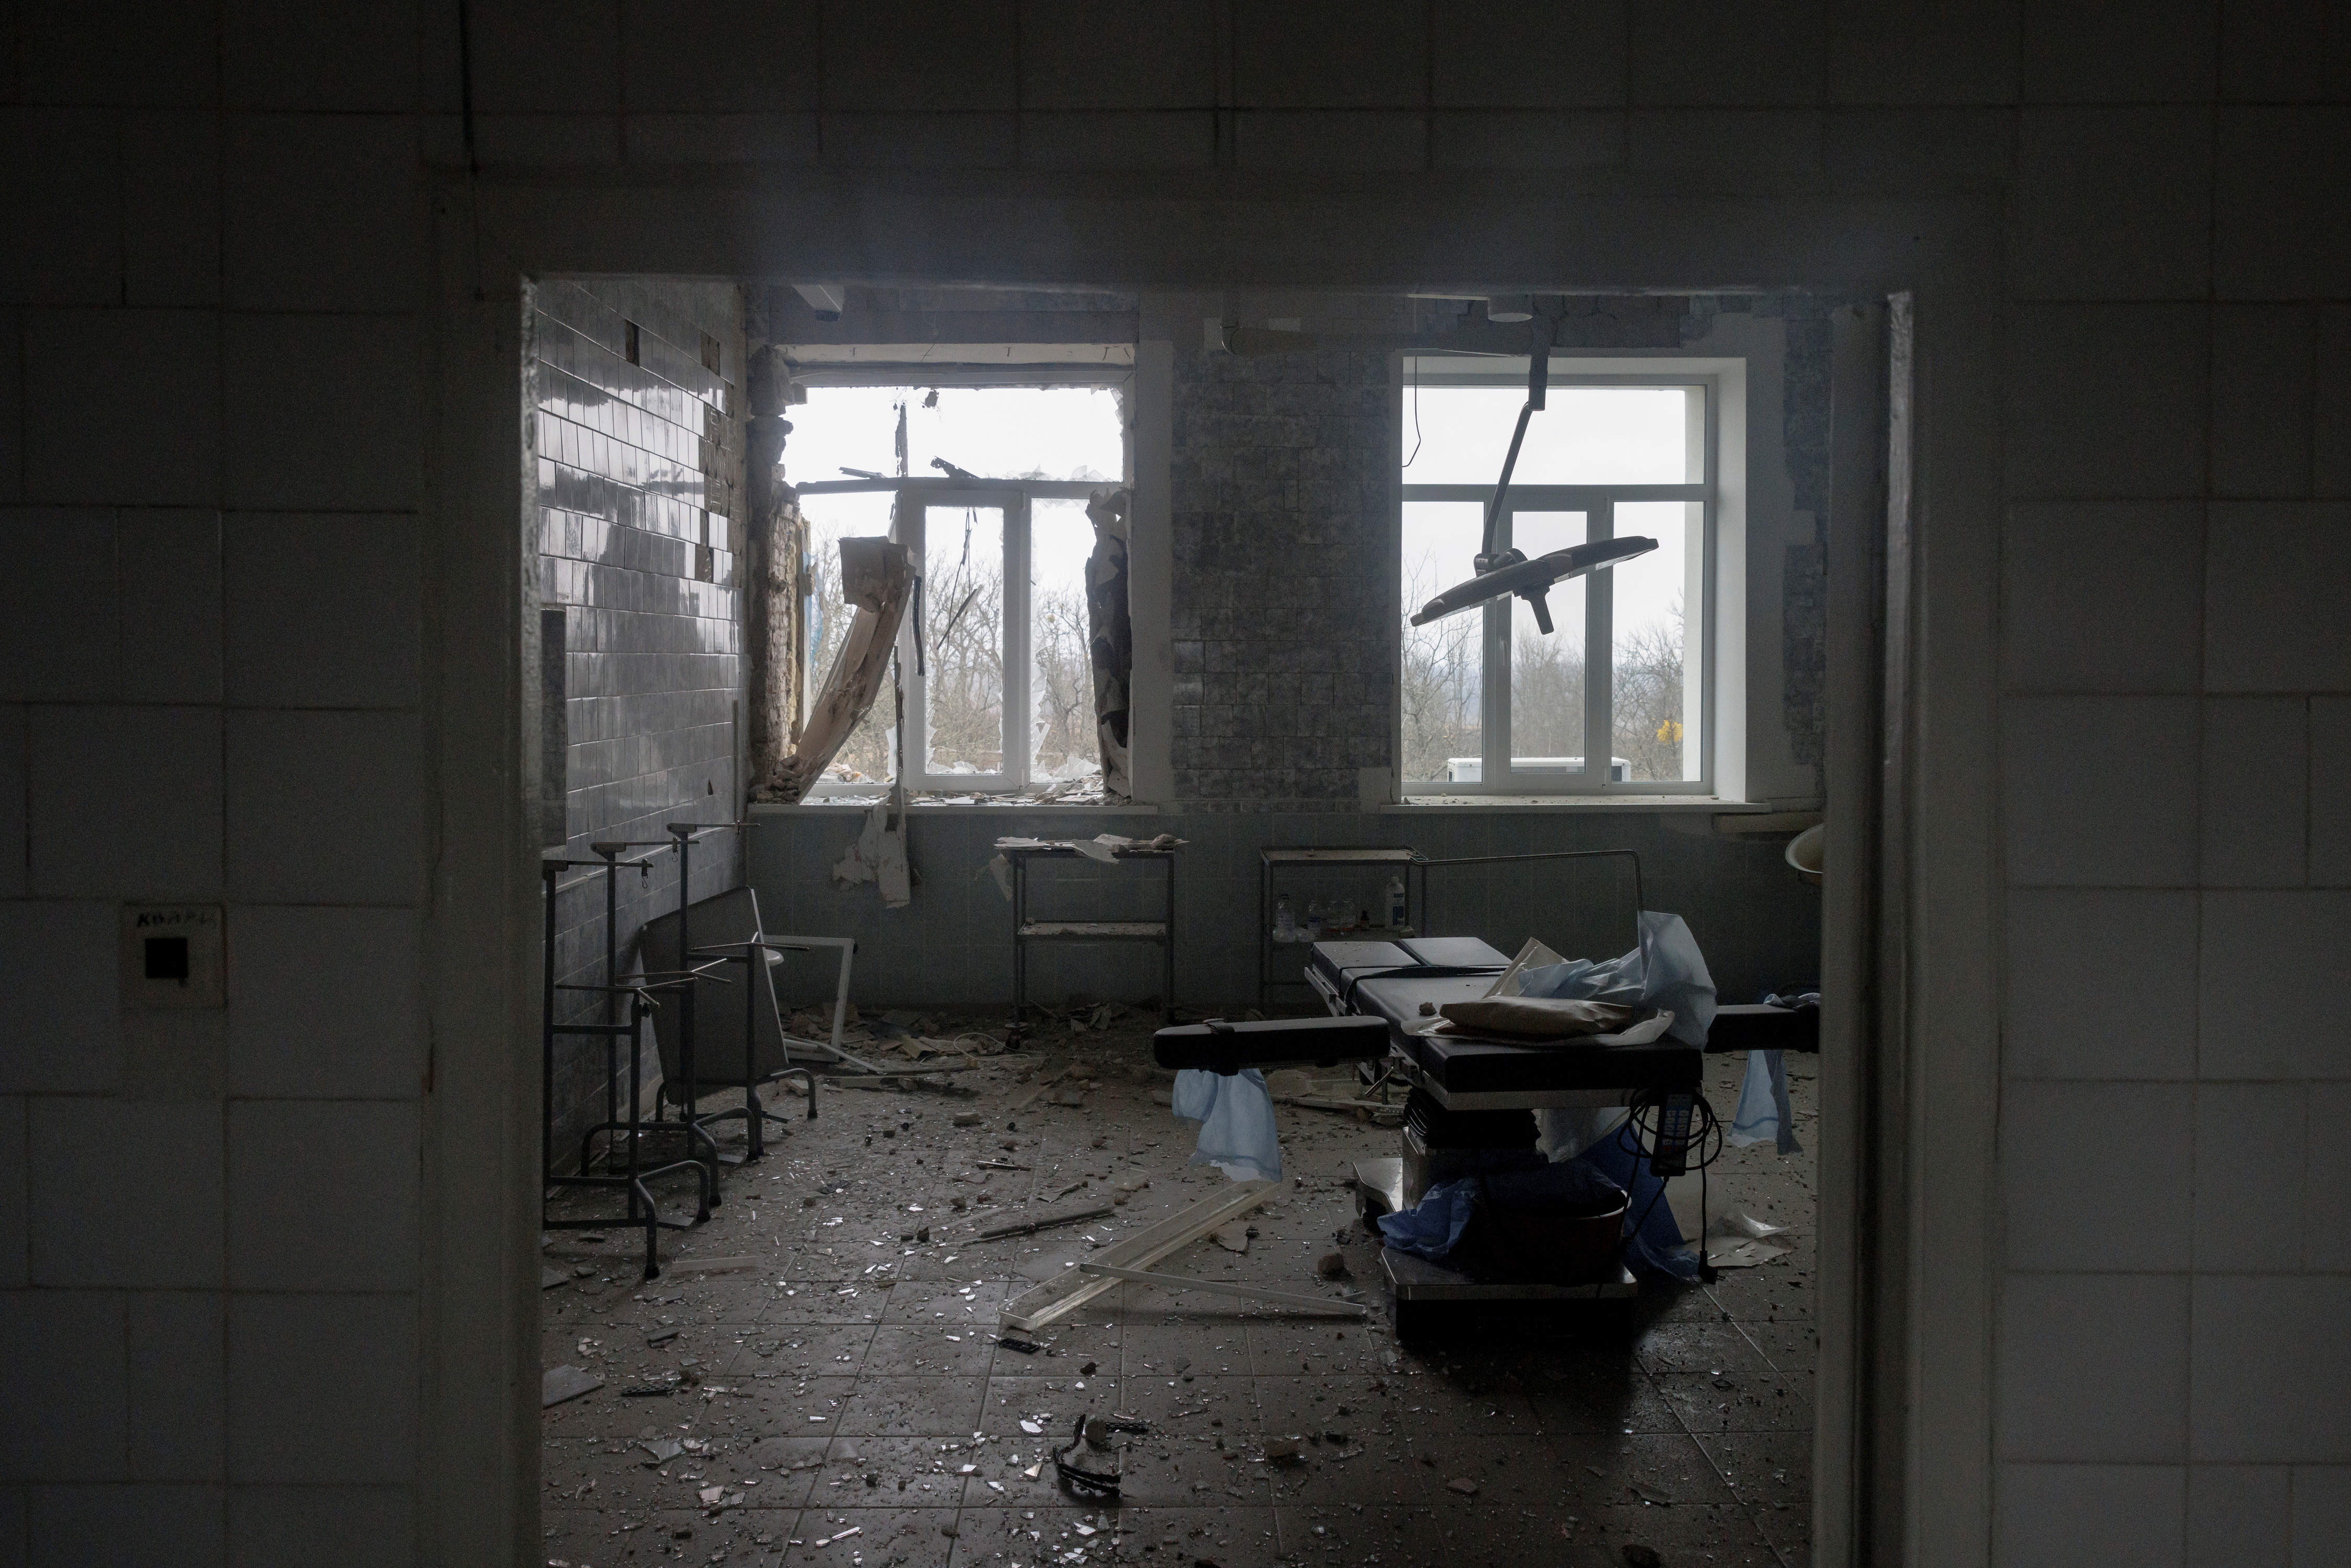 A damaged operating theatre is seen in a hospital in Trostyanets which staff said Russian troops attacked with tanks during their occupation of the town